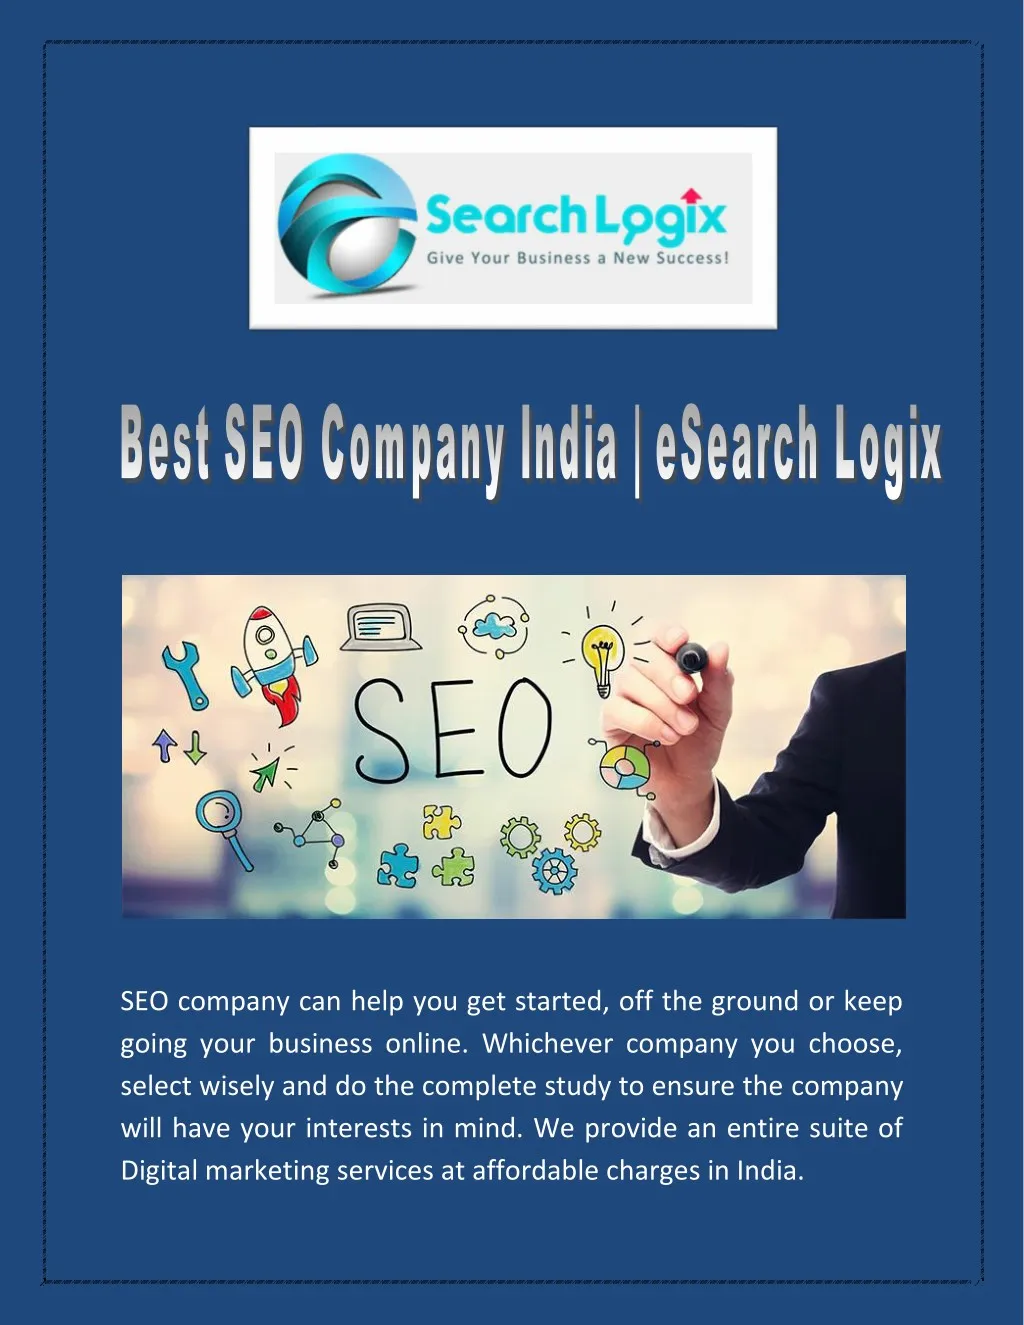 seo company can help you get started